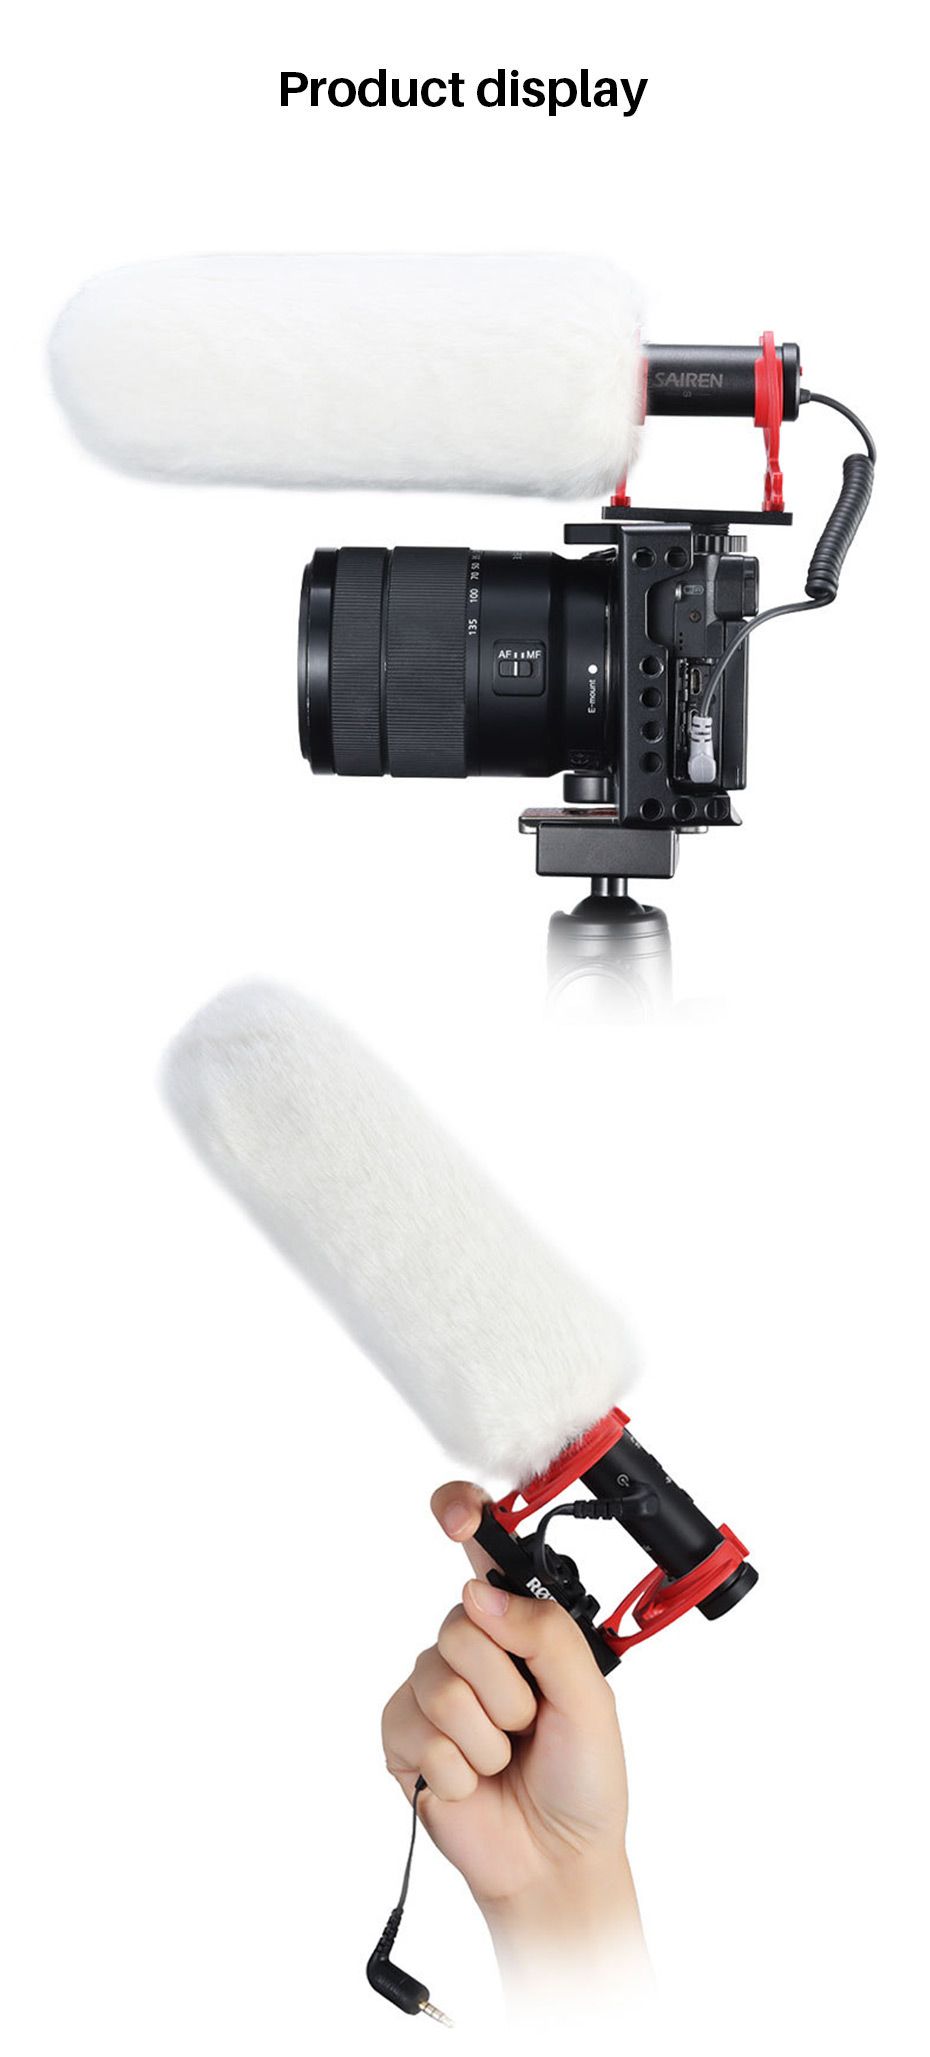 Sairen-A2-White-Silk-Blend-Microphone-Windshield-Low-Self-Noise-Furry-Cover-for-Rode-NTG-Professiona-1728878